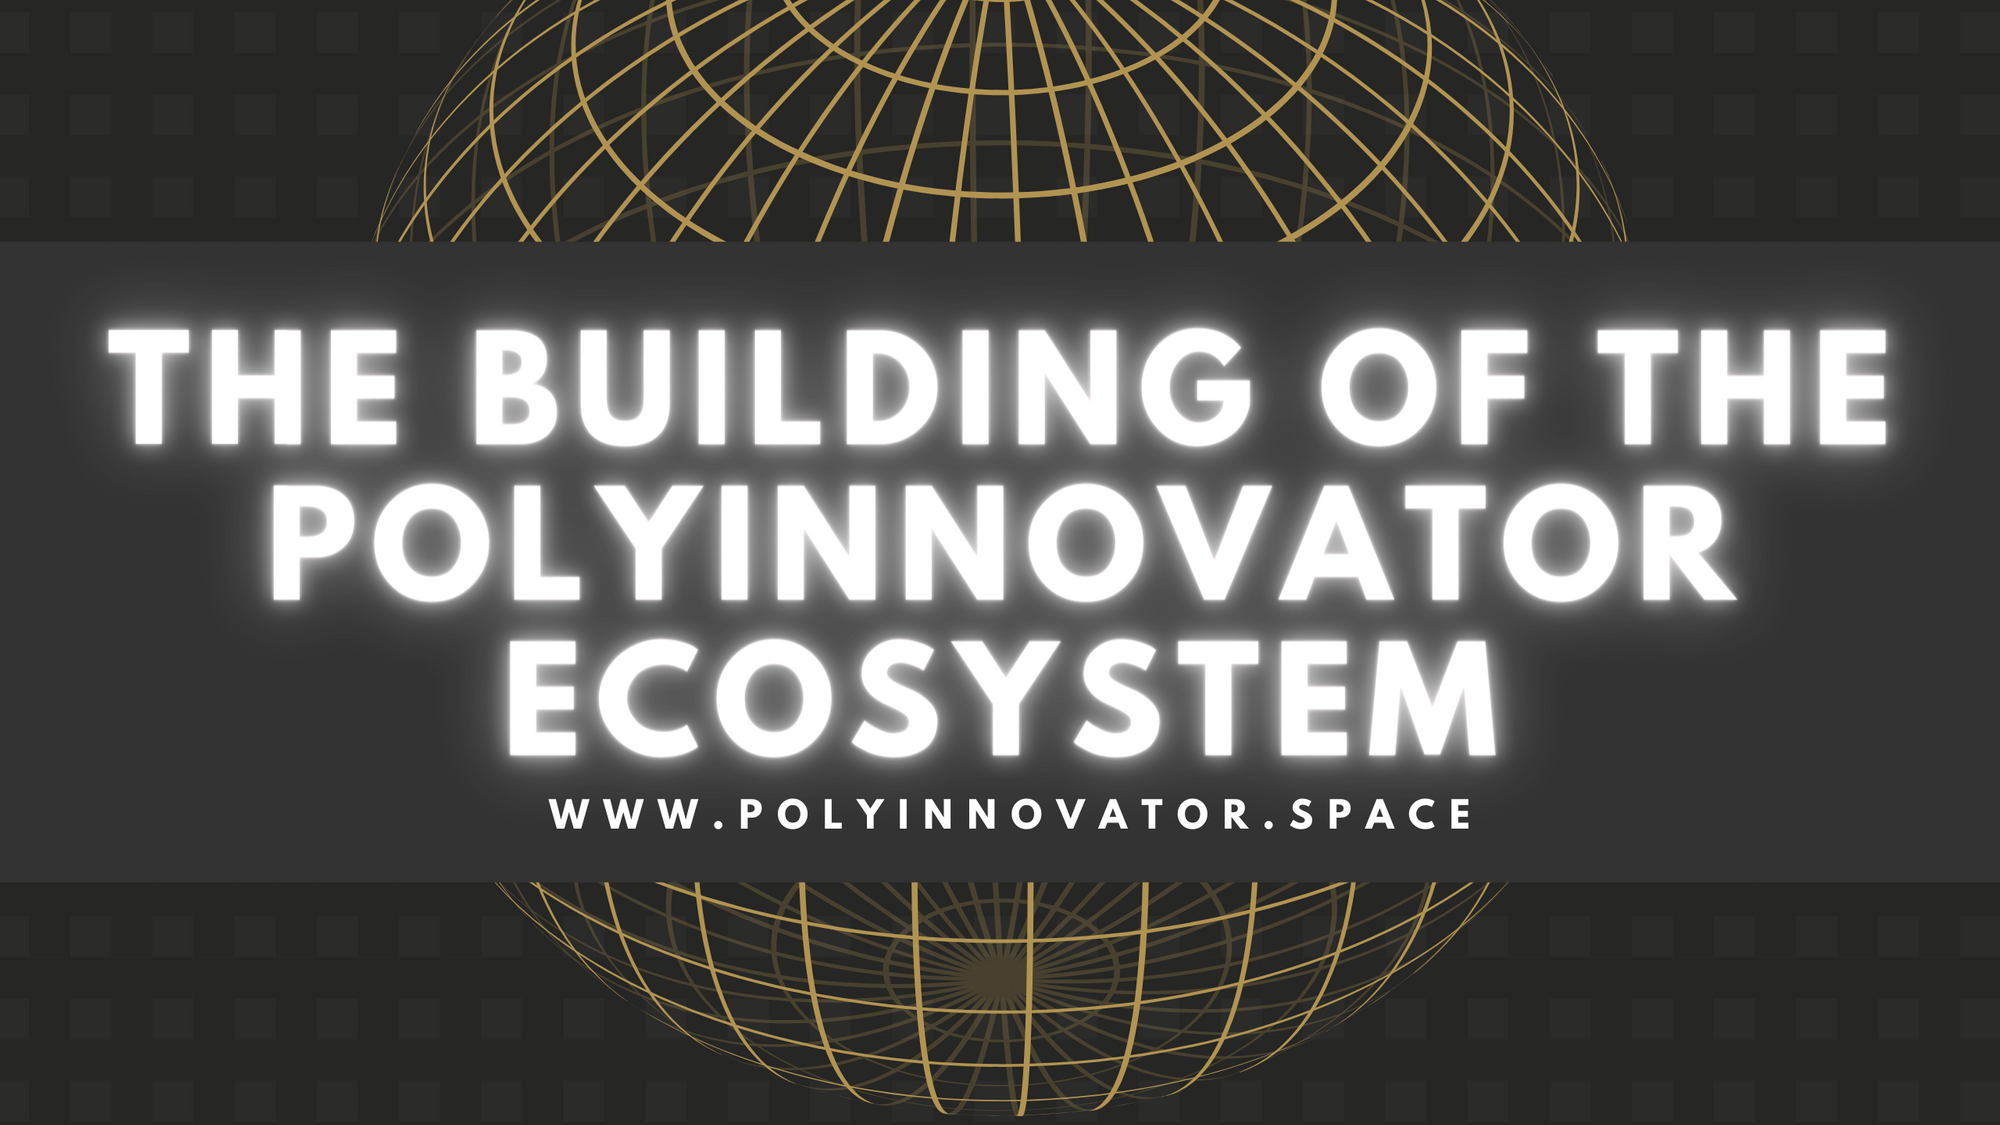 The Building of the PolyInnovator Ecosystem